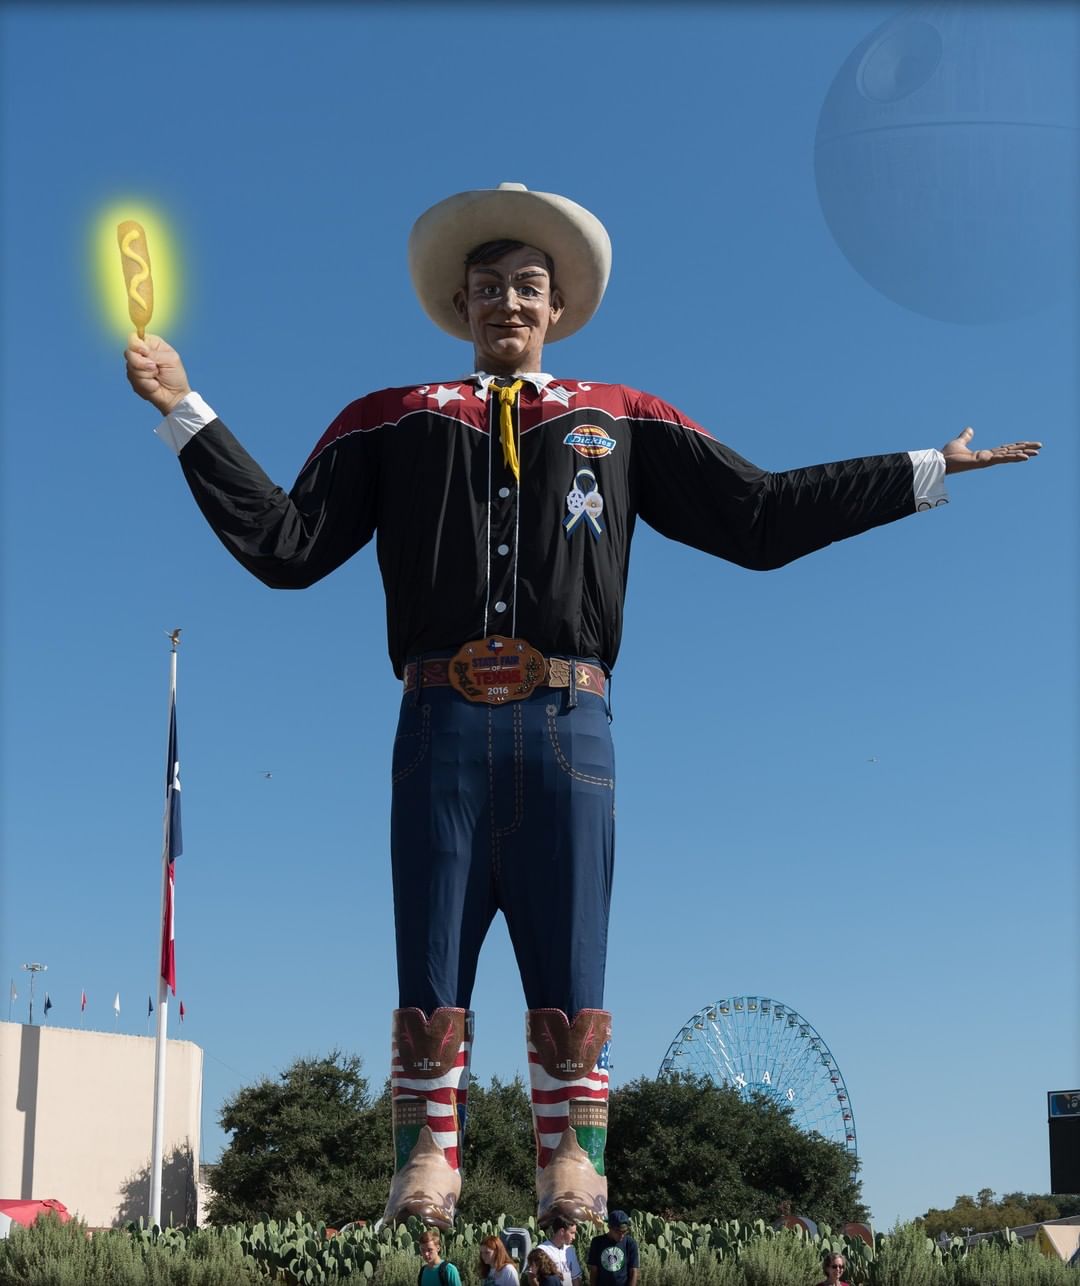 May the fourth be with you. #May4 #BigTex